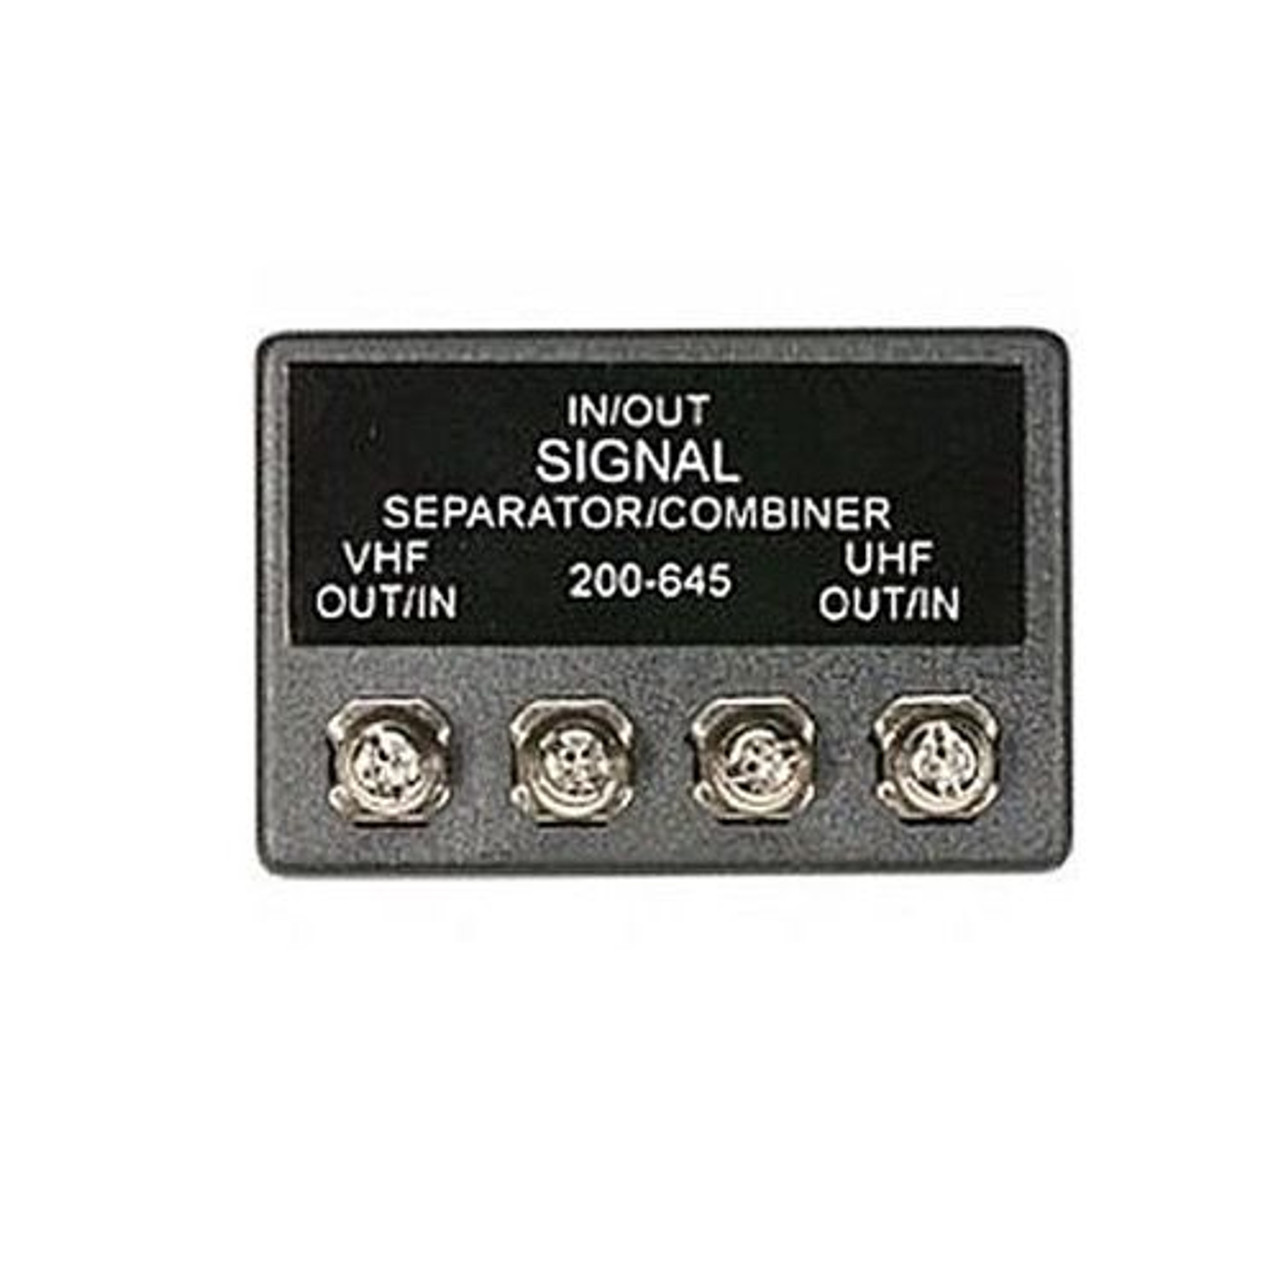 Antenna Signal Combiner UHF VHF Philips PH61006 Off-Air Band Separator Aerial Lead Connection Splitter, Gold, 75-300 Ohm Adapter, Part # PH-61006